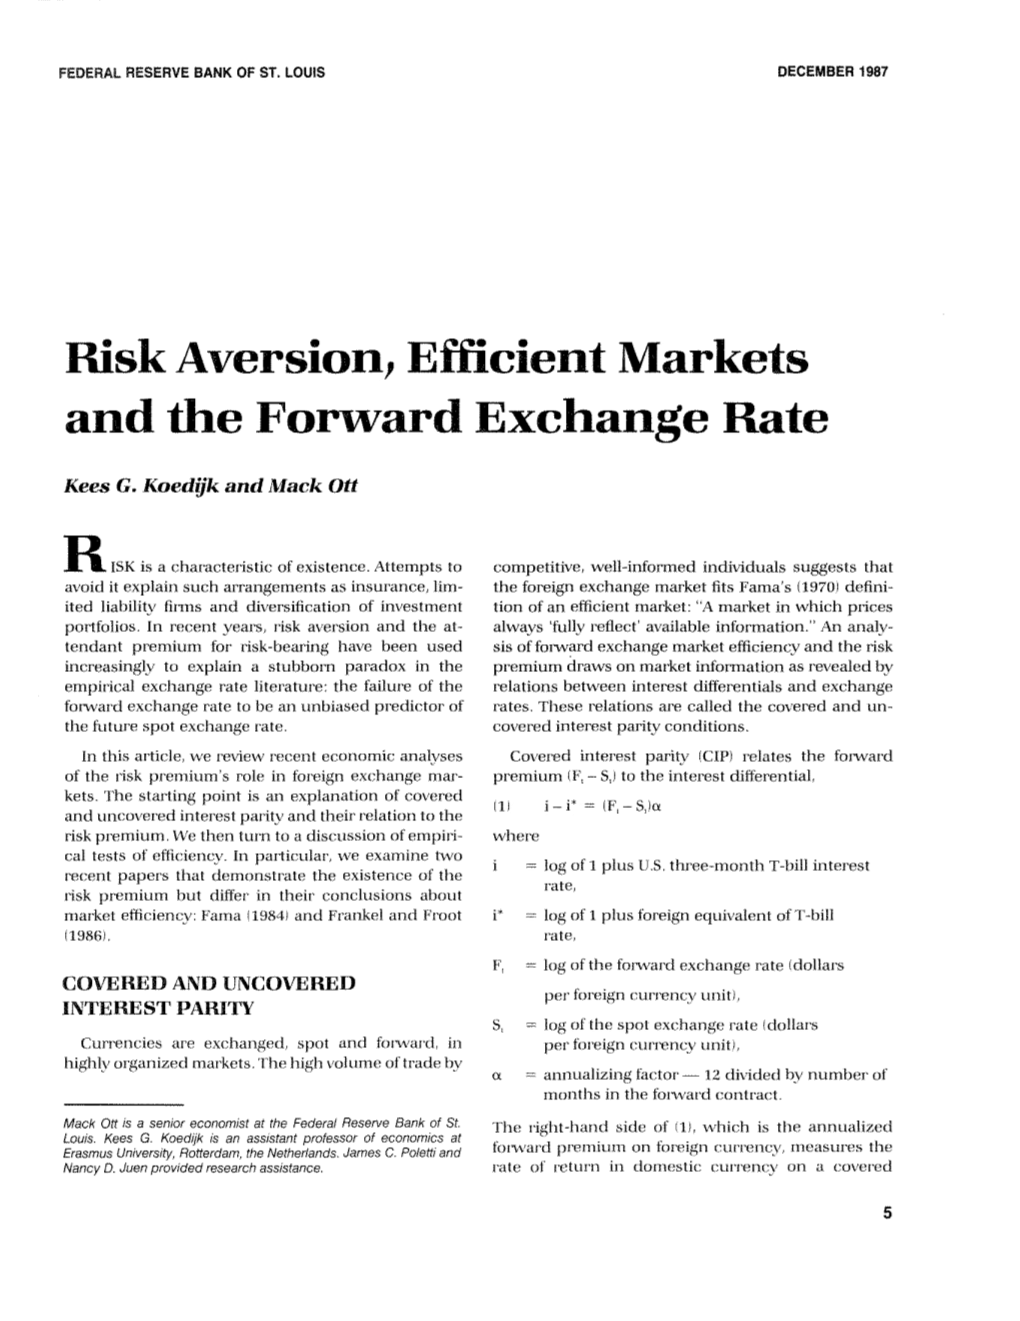 Risk Aversion, Efficient Markets, and the Forward Exchange Rate